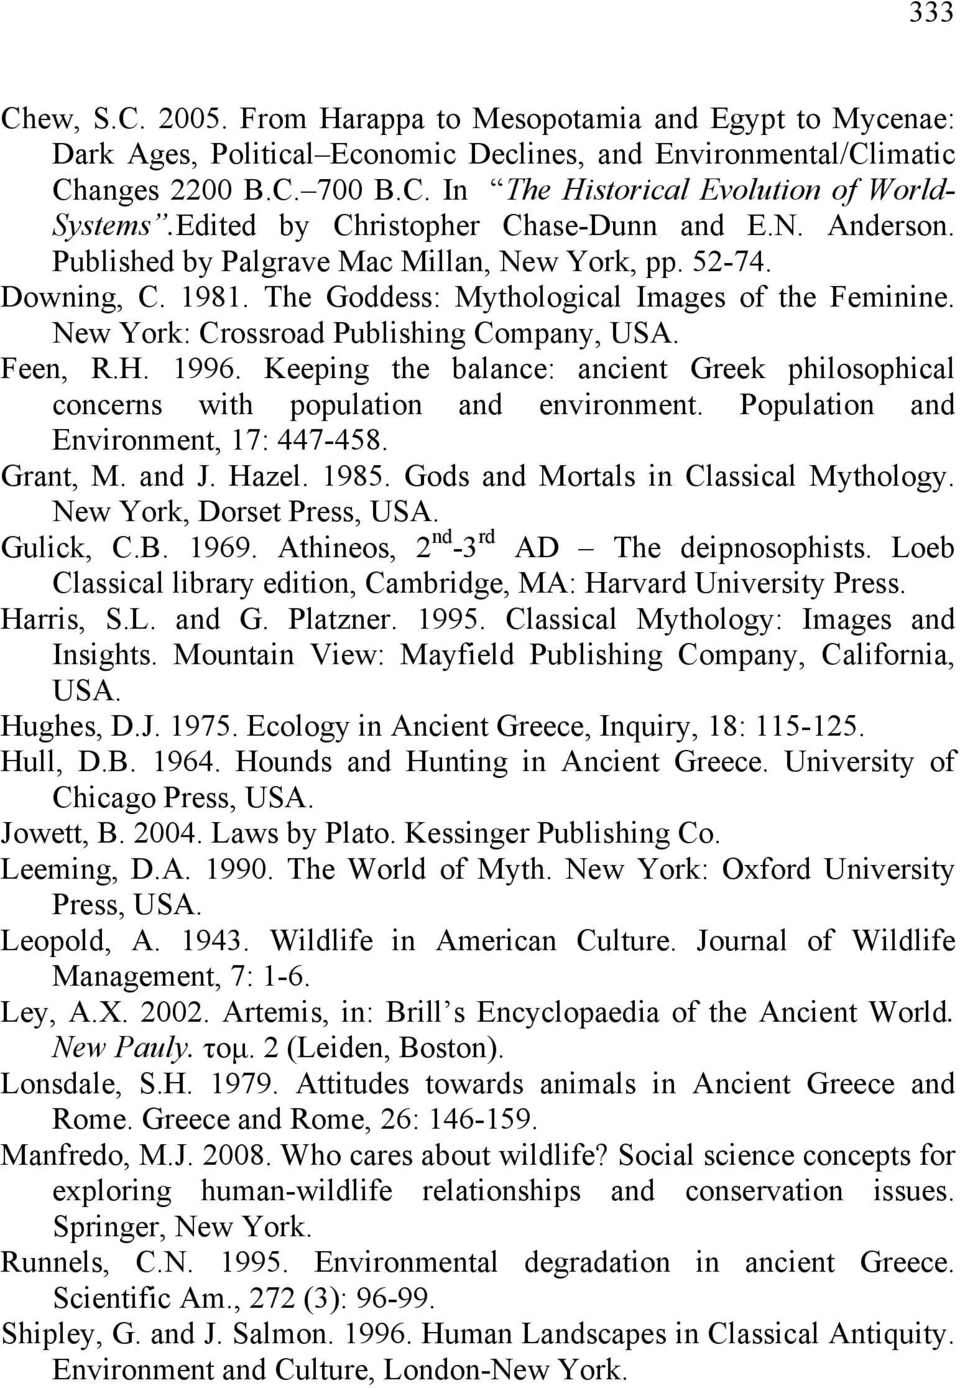 New York: Crossroad Publishing Company, USA. Feen, R.H. 1996. Keeping the balance: ancient Greek philosophical concerns with population and environment. Population and Environment, 17: 447-458.